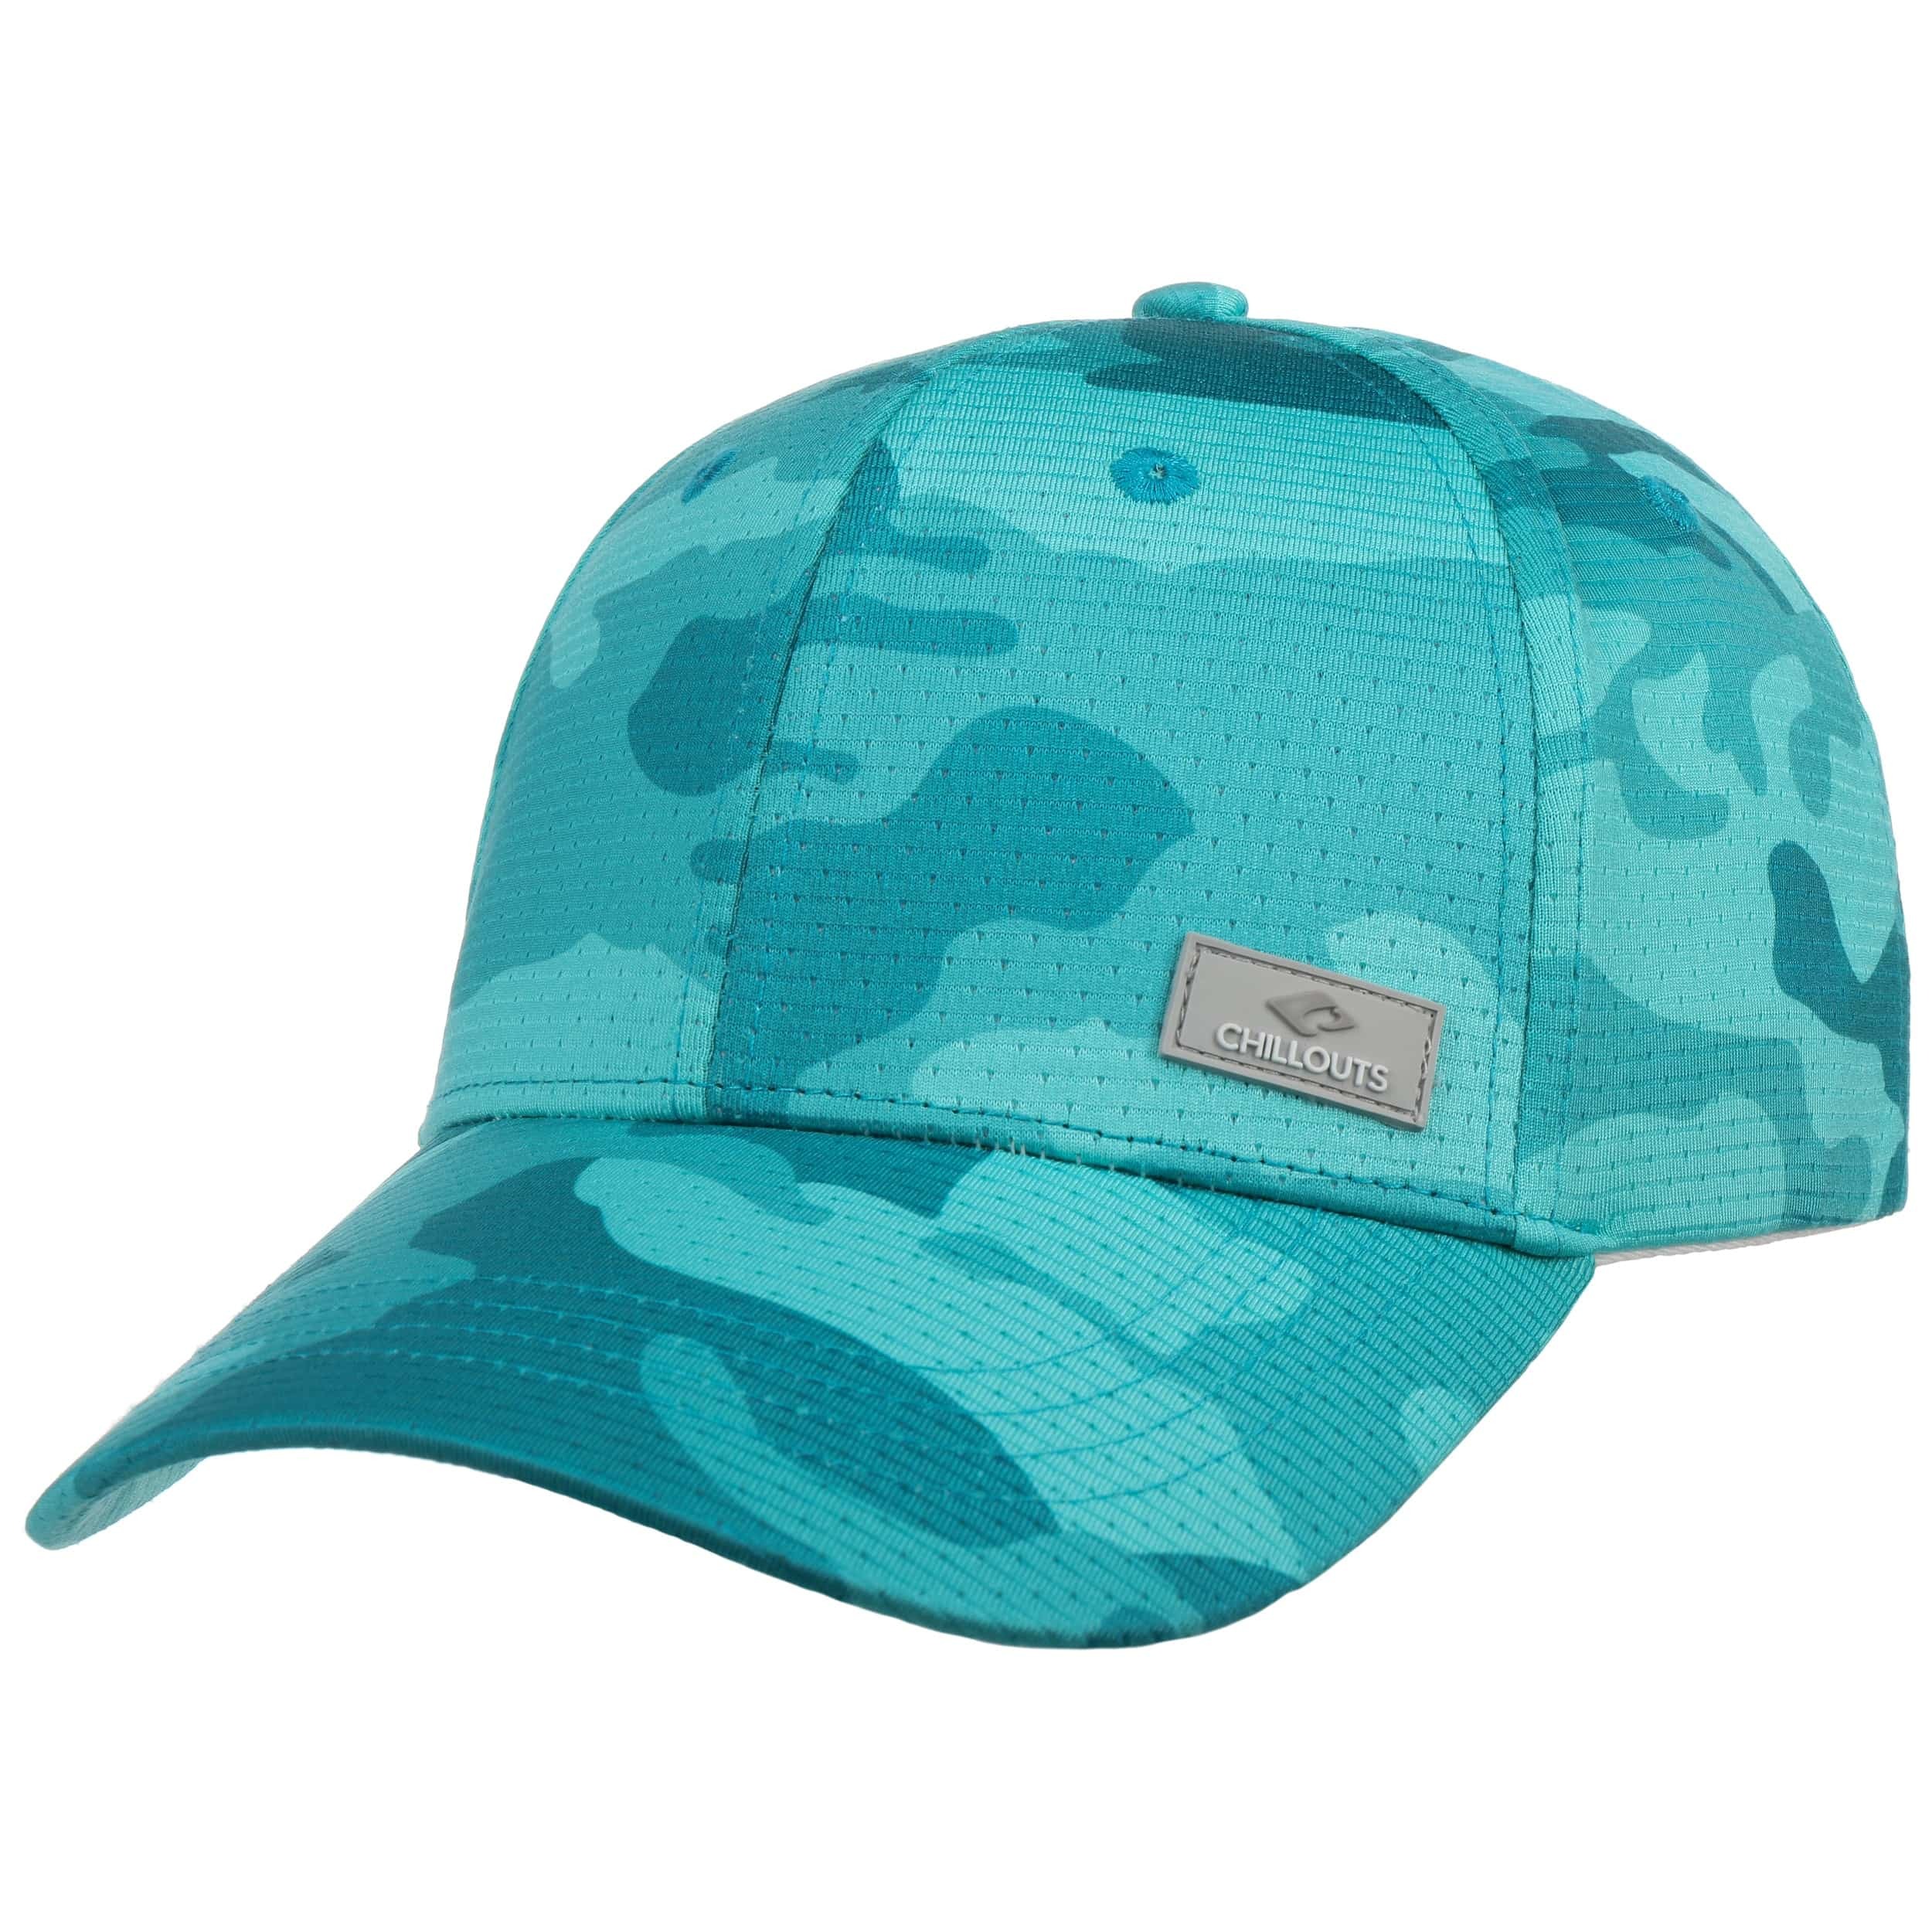 by Kampala Camouflage 26,95 Cap Chillouts - €